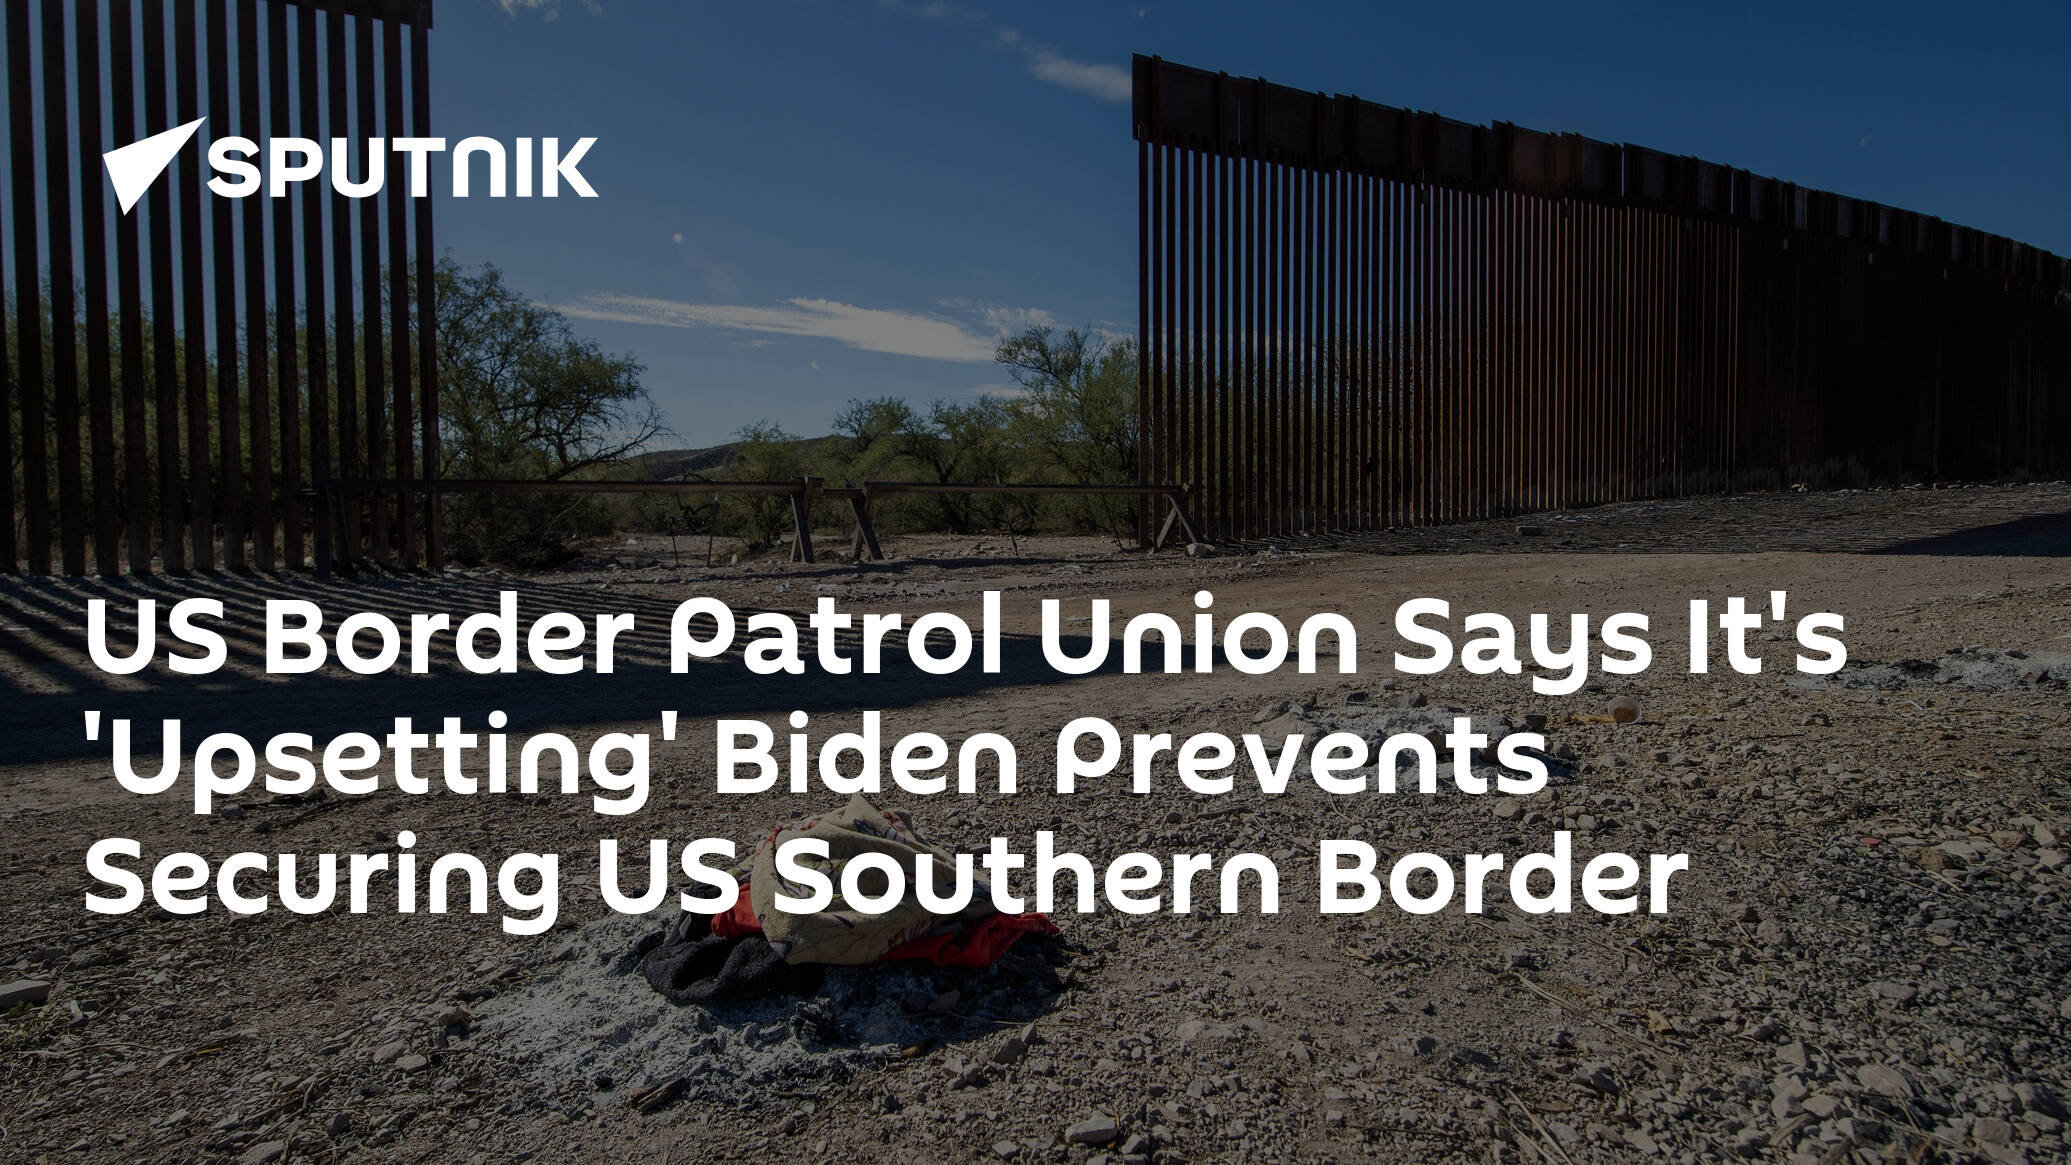 US Border Patrol Union Says It's 'Upsetting' Biden Prevents Securing US Southern Border